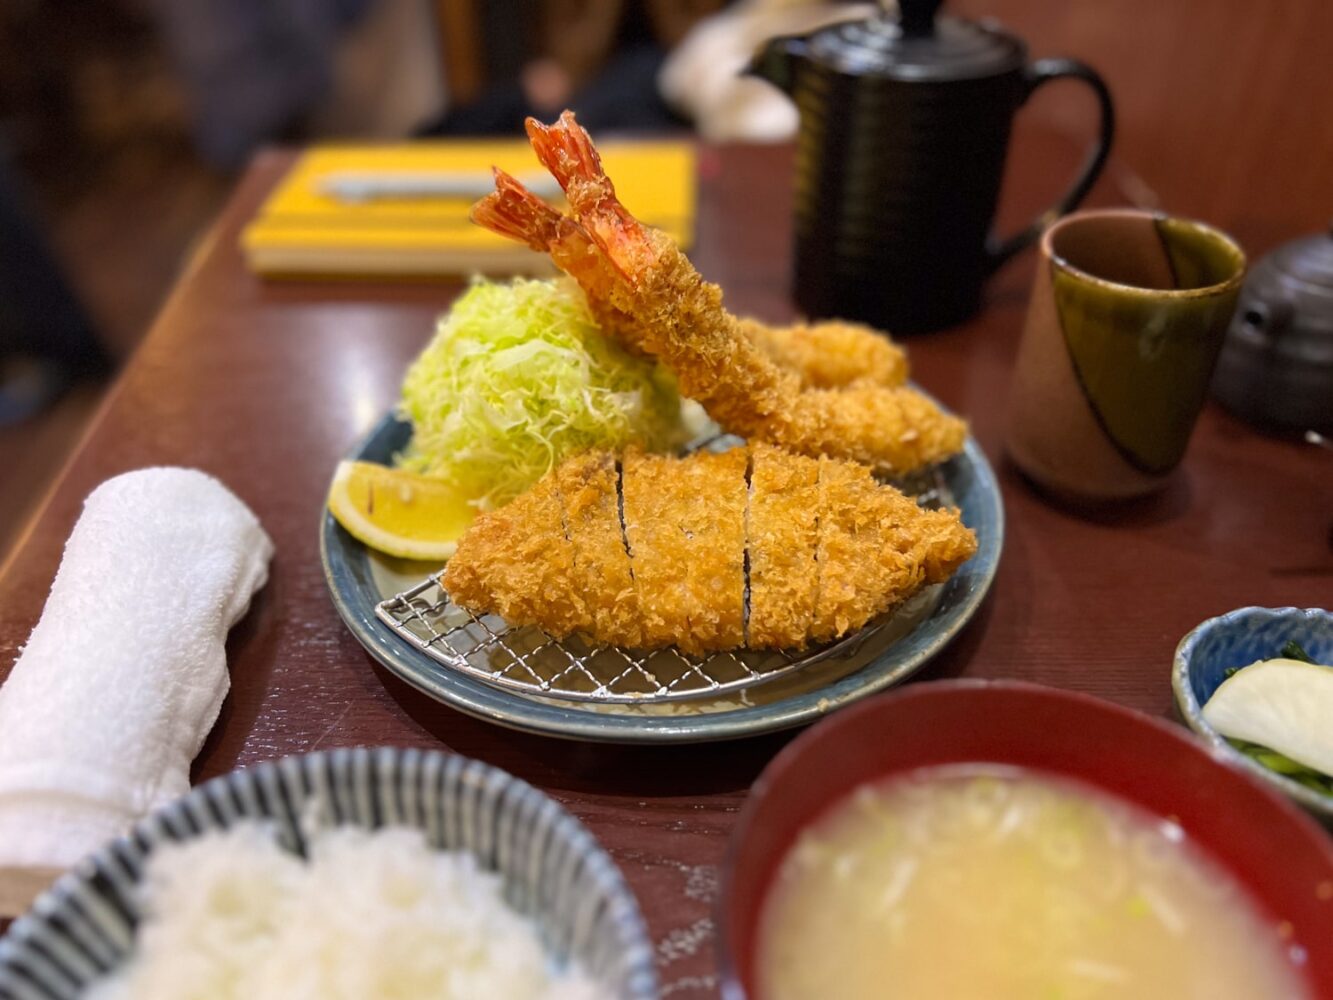 Plate of Japanese Tonkatsu (pork cutlet) and shrimp tempura with side dishes of rice and miso soup.